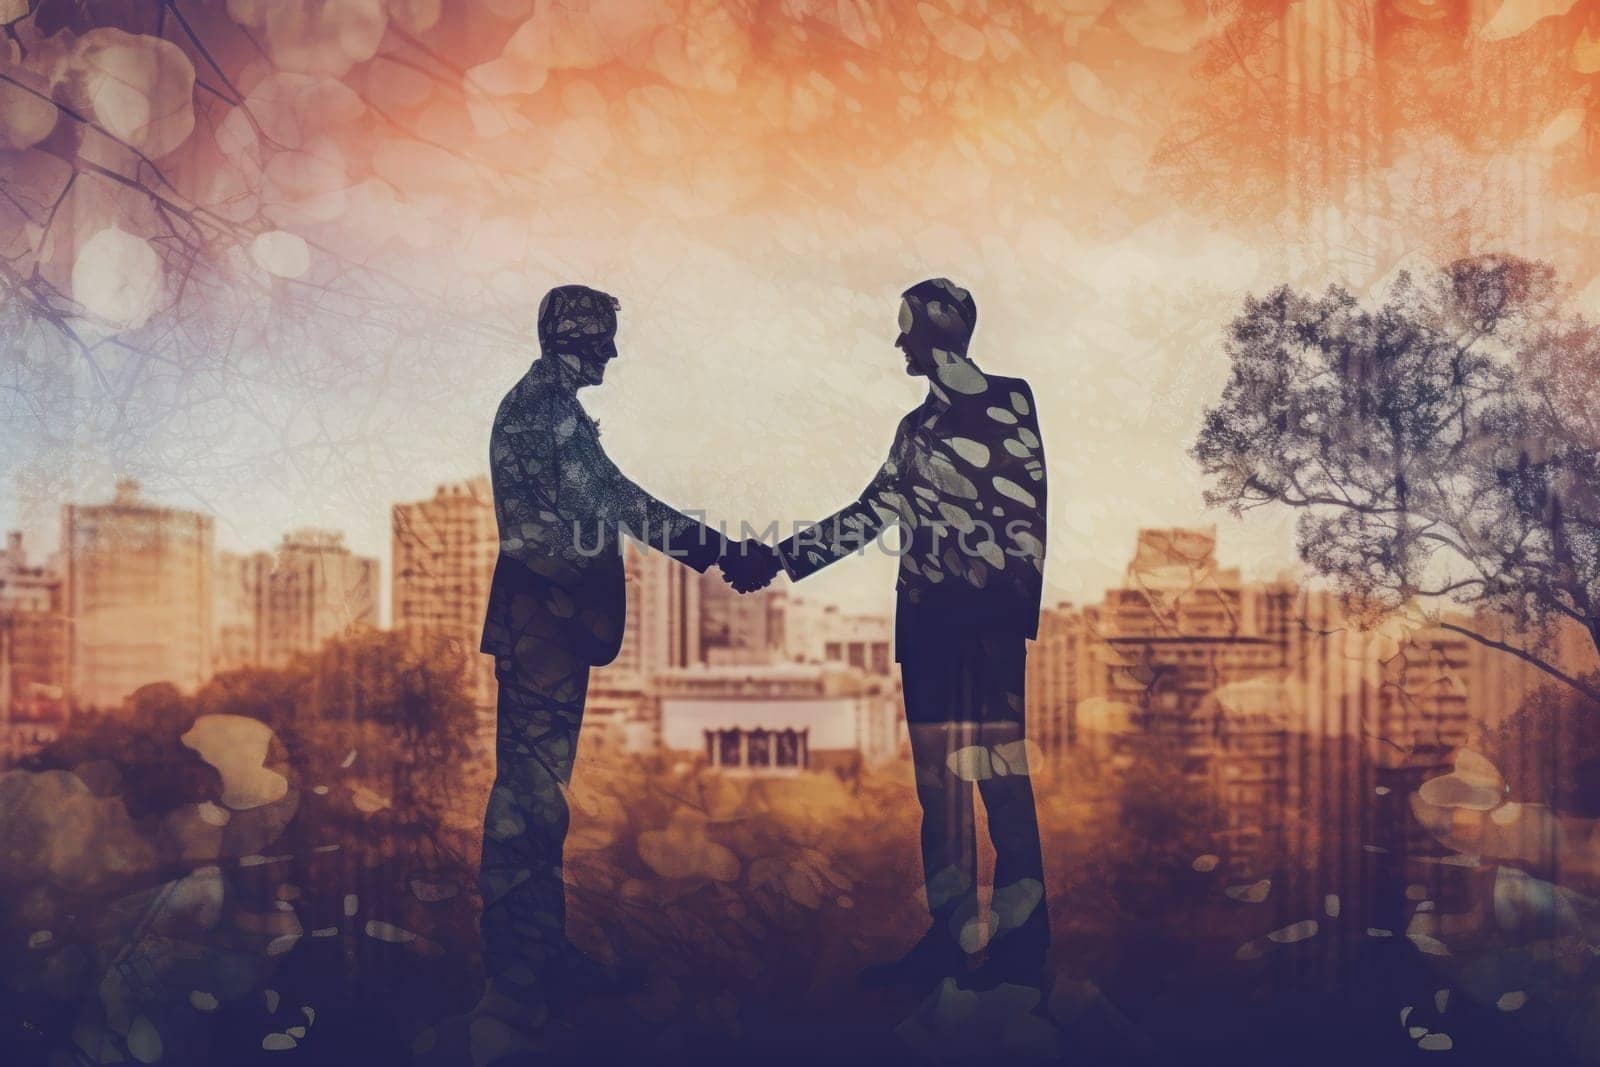 Double exposure on business people closing a deal with a handshake.